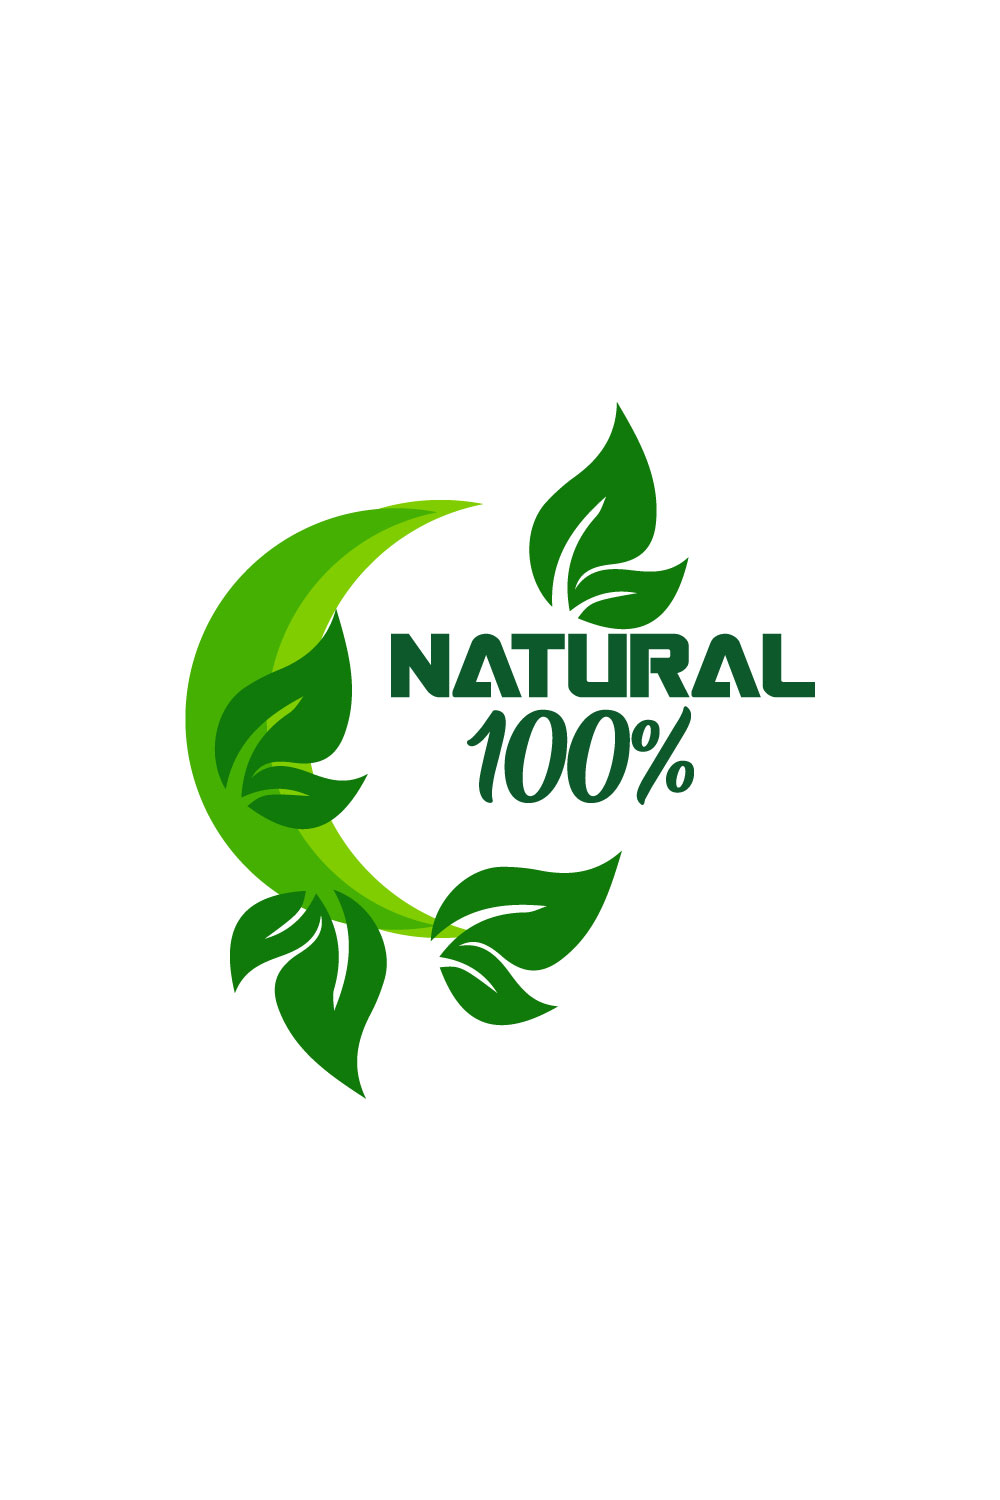 Free green food logo pinterest preview image.